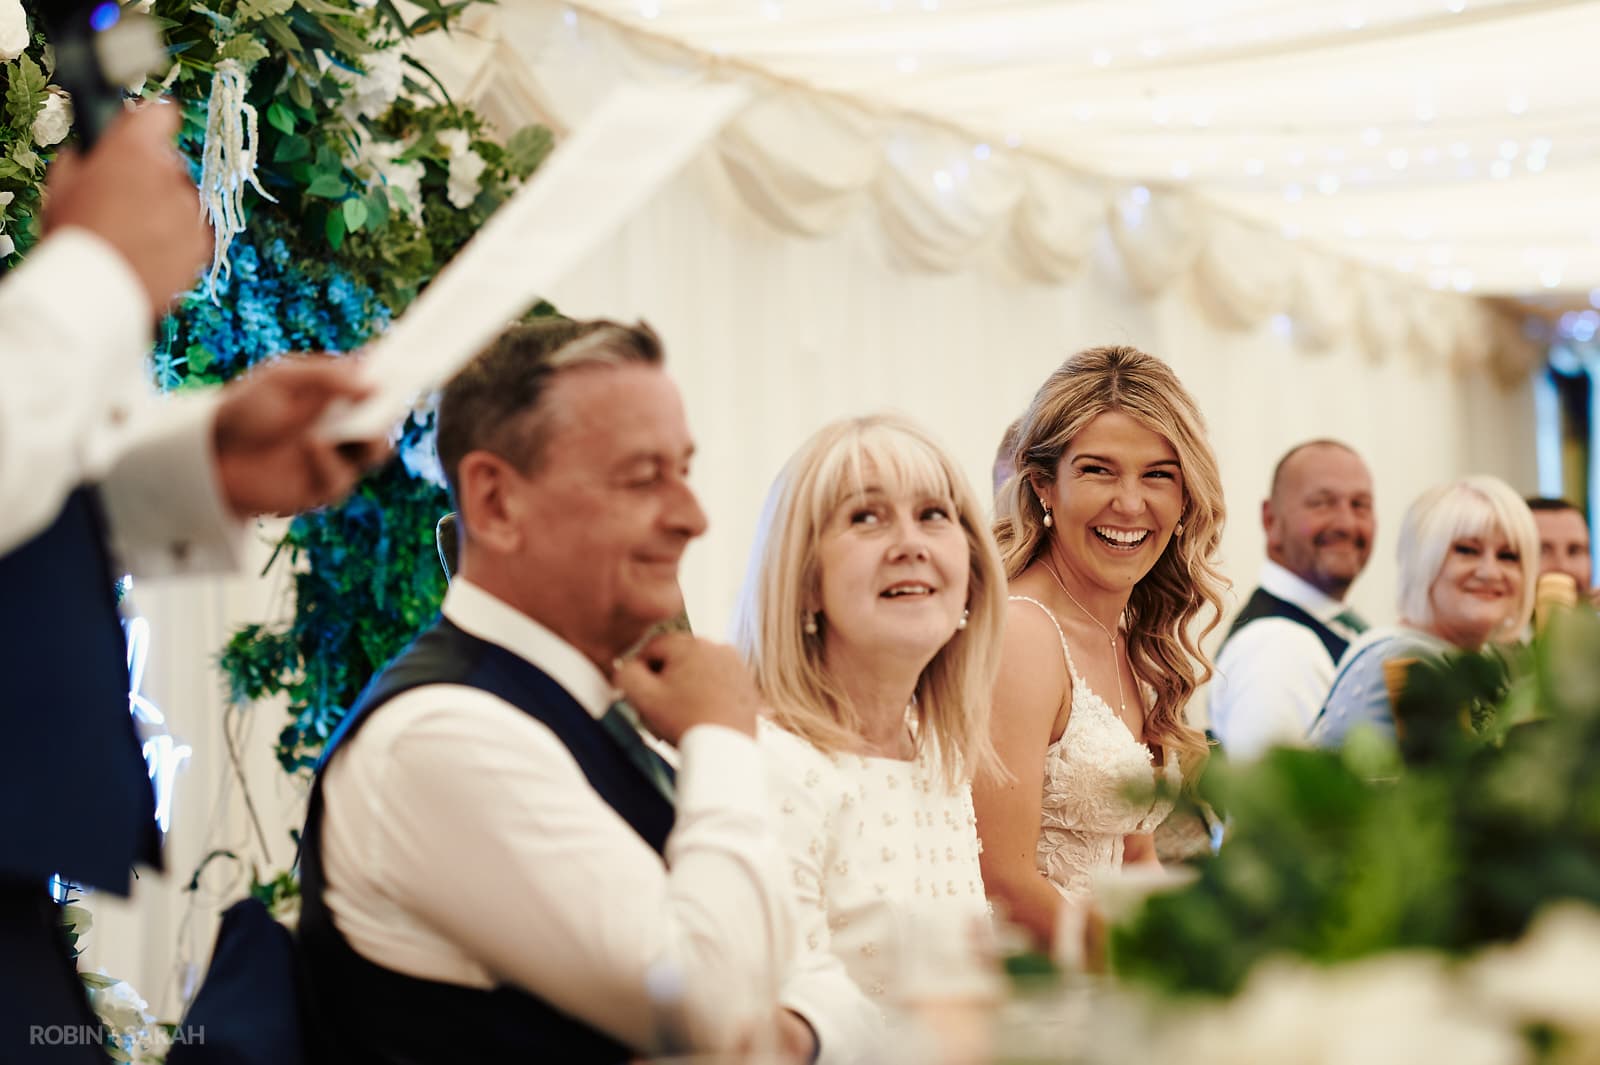 Wedding speeches in marquee at Coombe Abbey